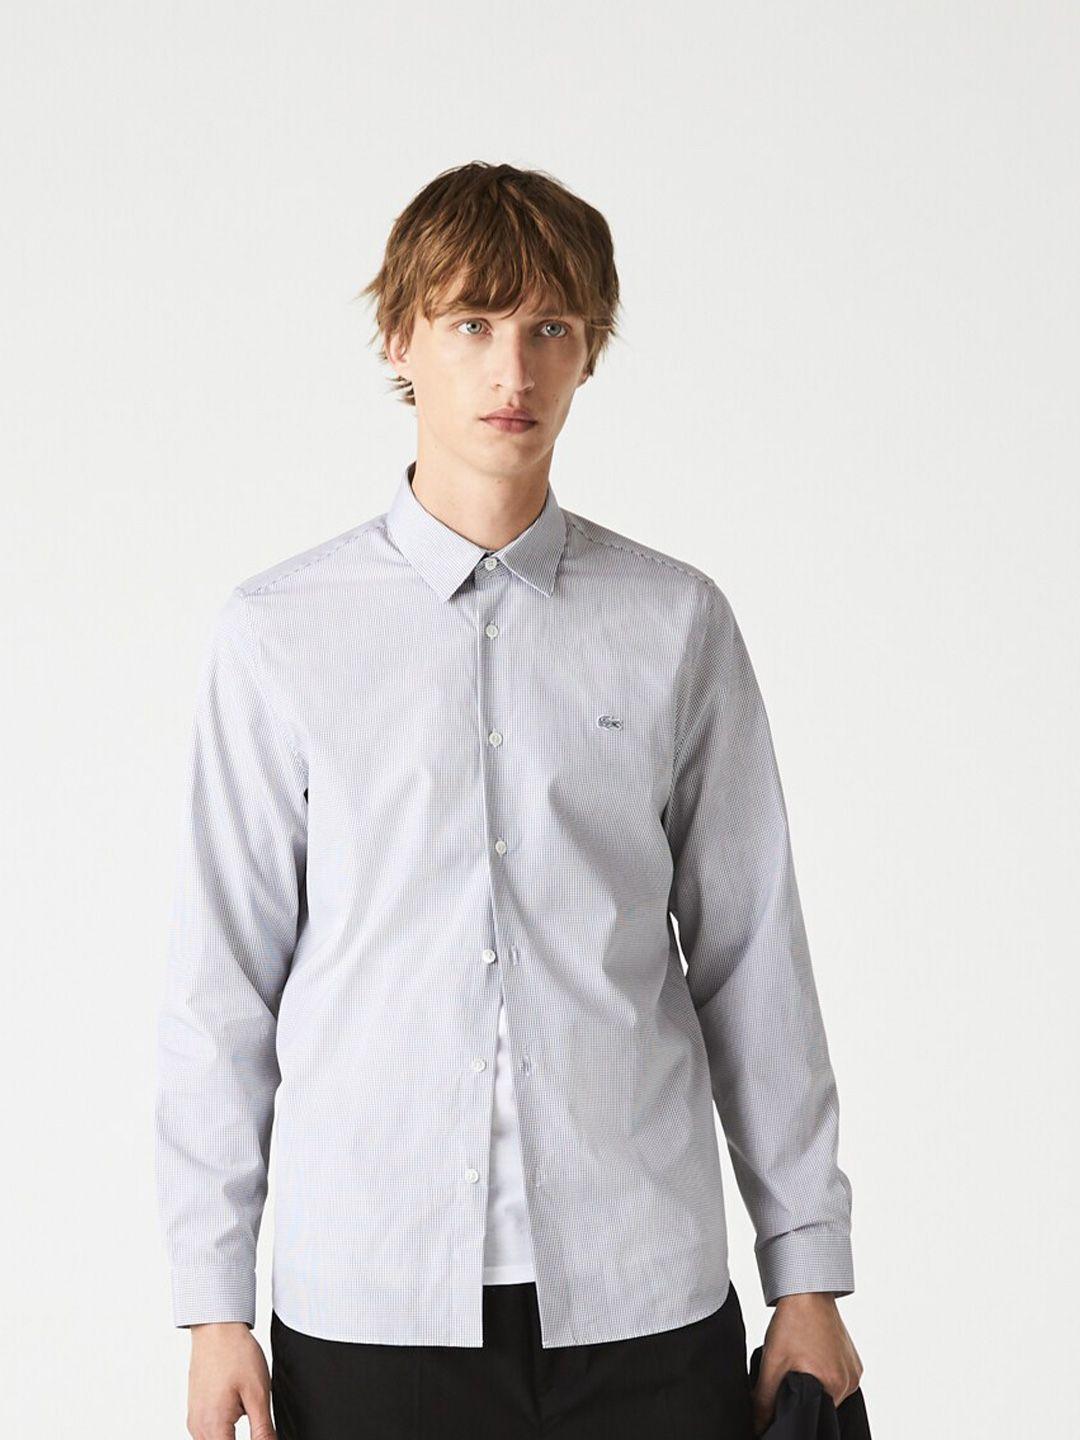 lacoste-men-modern-checked-pure-cotton-casual-shirt